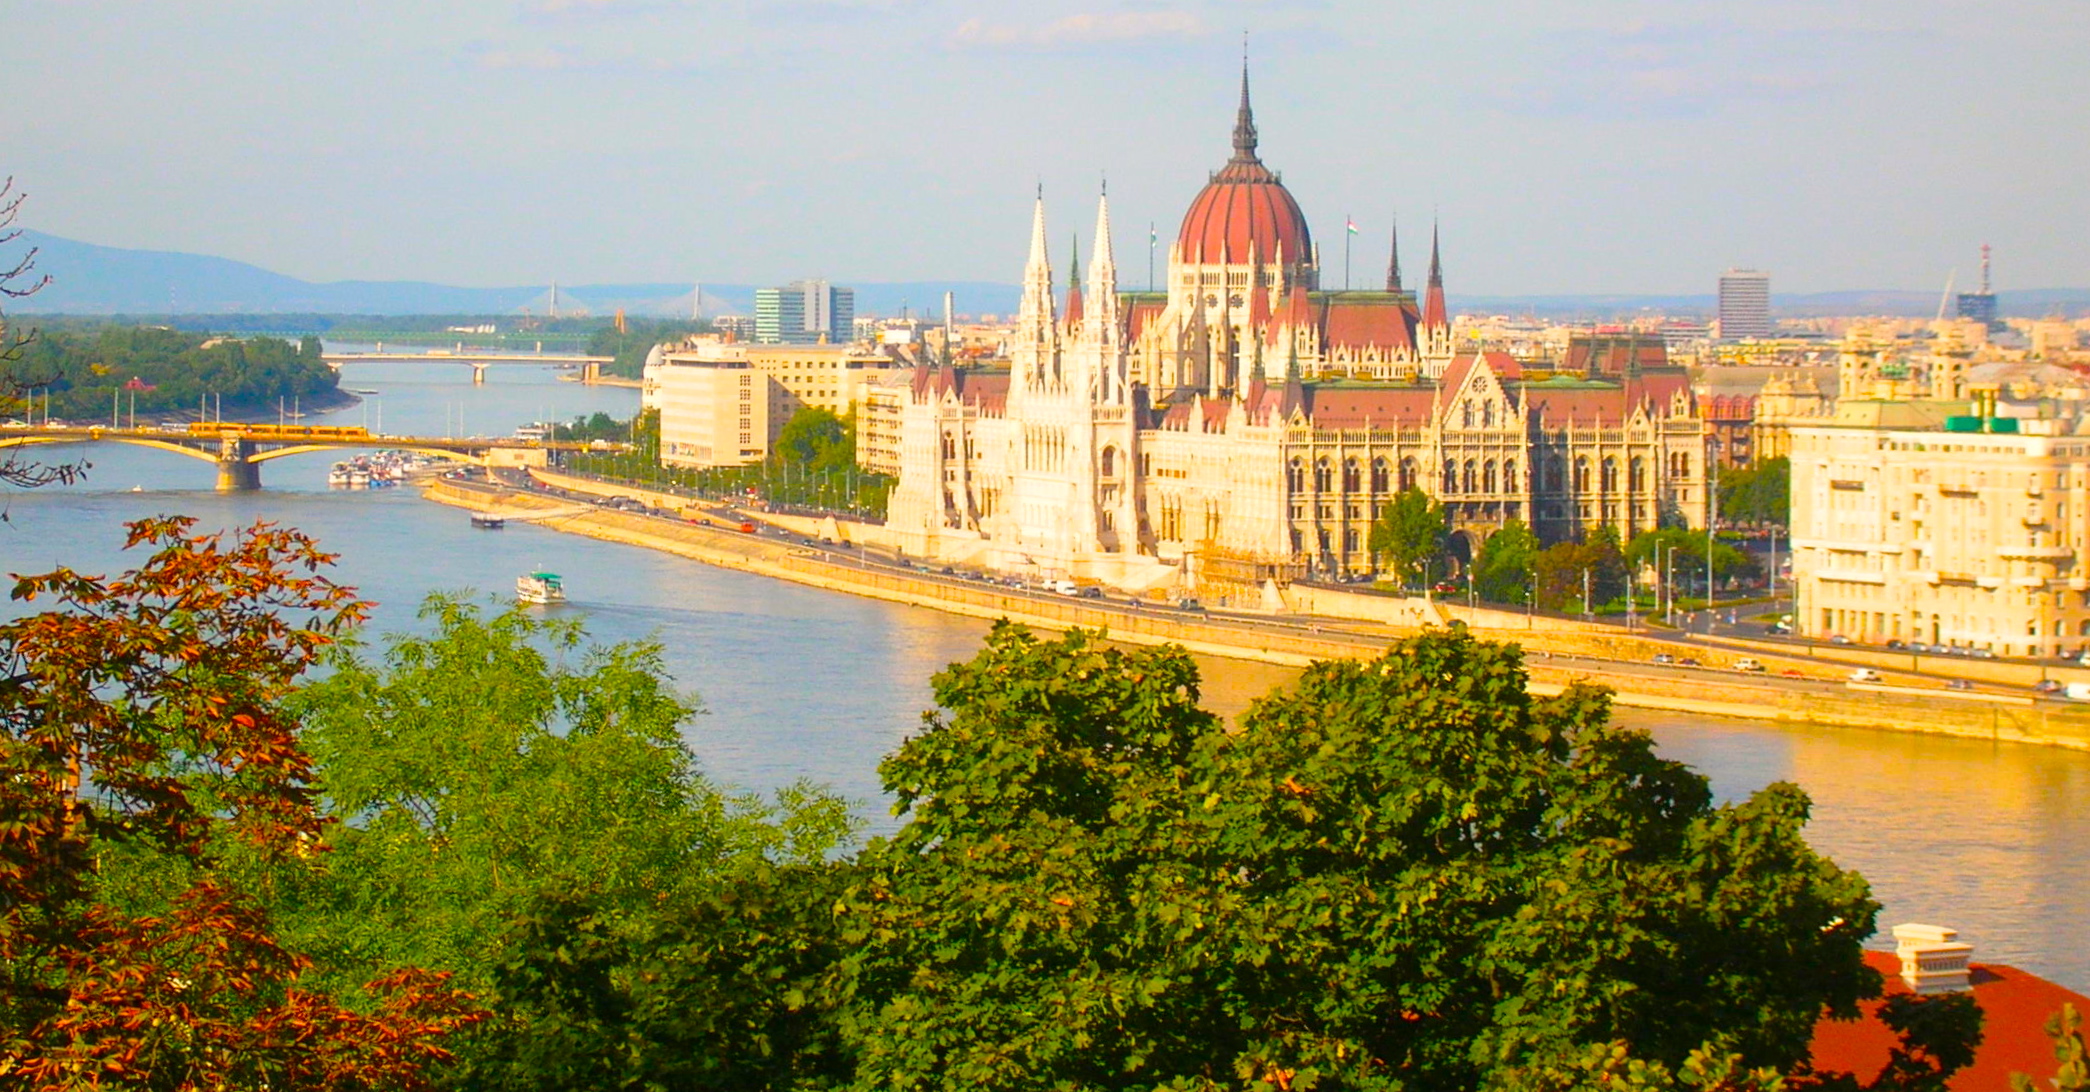 The Hungarian Parliament, with it's graceful spires and dome, sits on the Pest side of the Danube. Photo by Marla Norman.